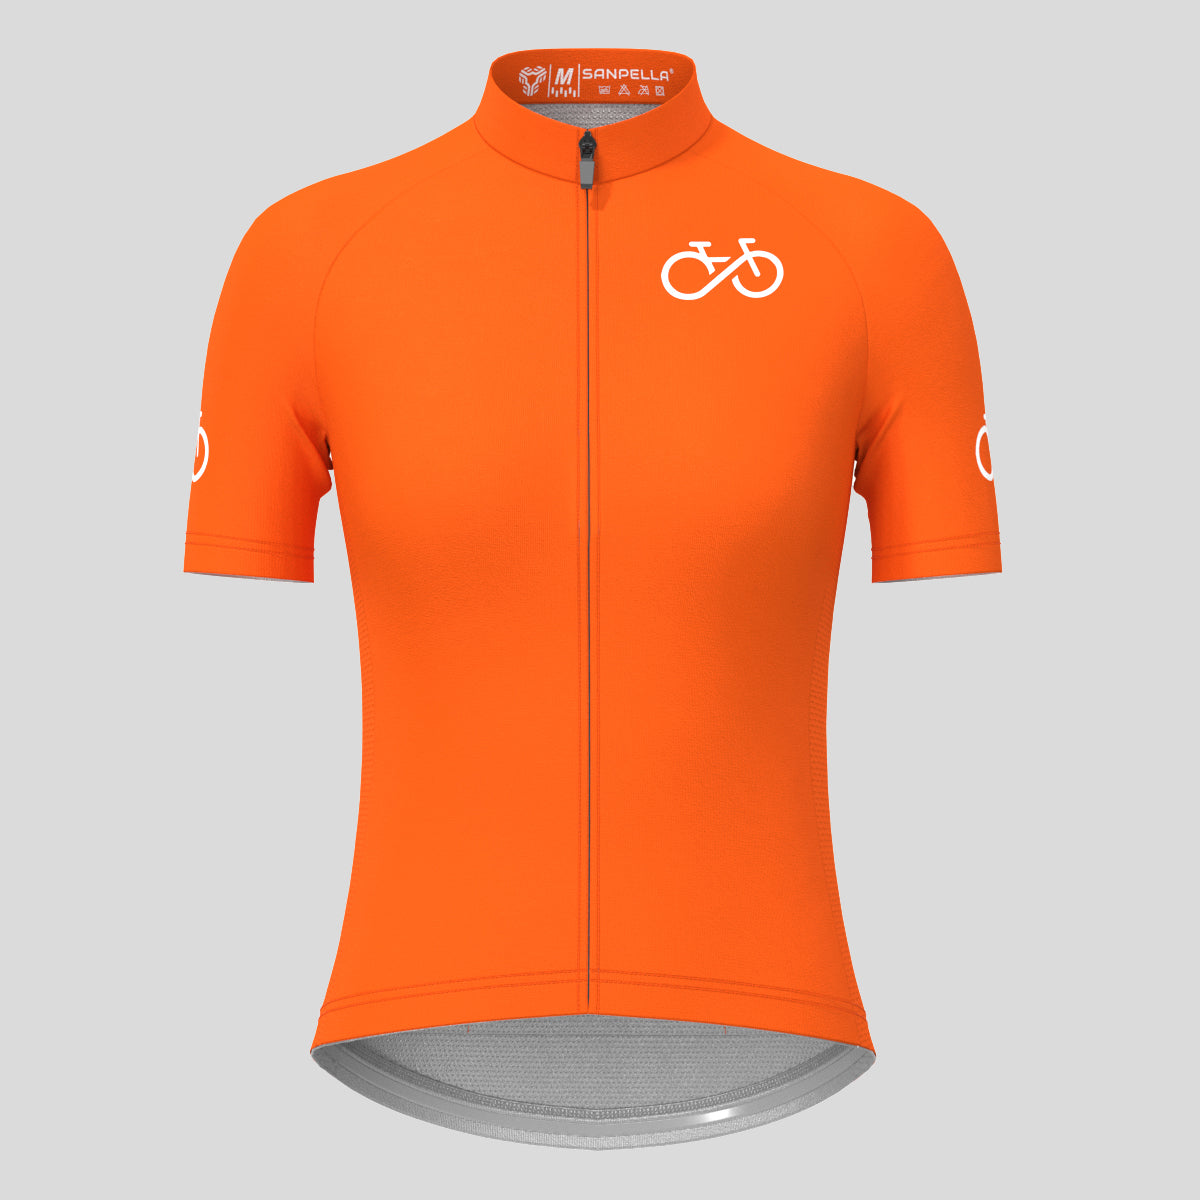 Ride Forever Women's Cycling Jersey - Tangerine